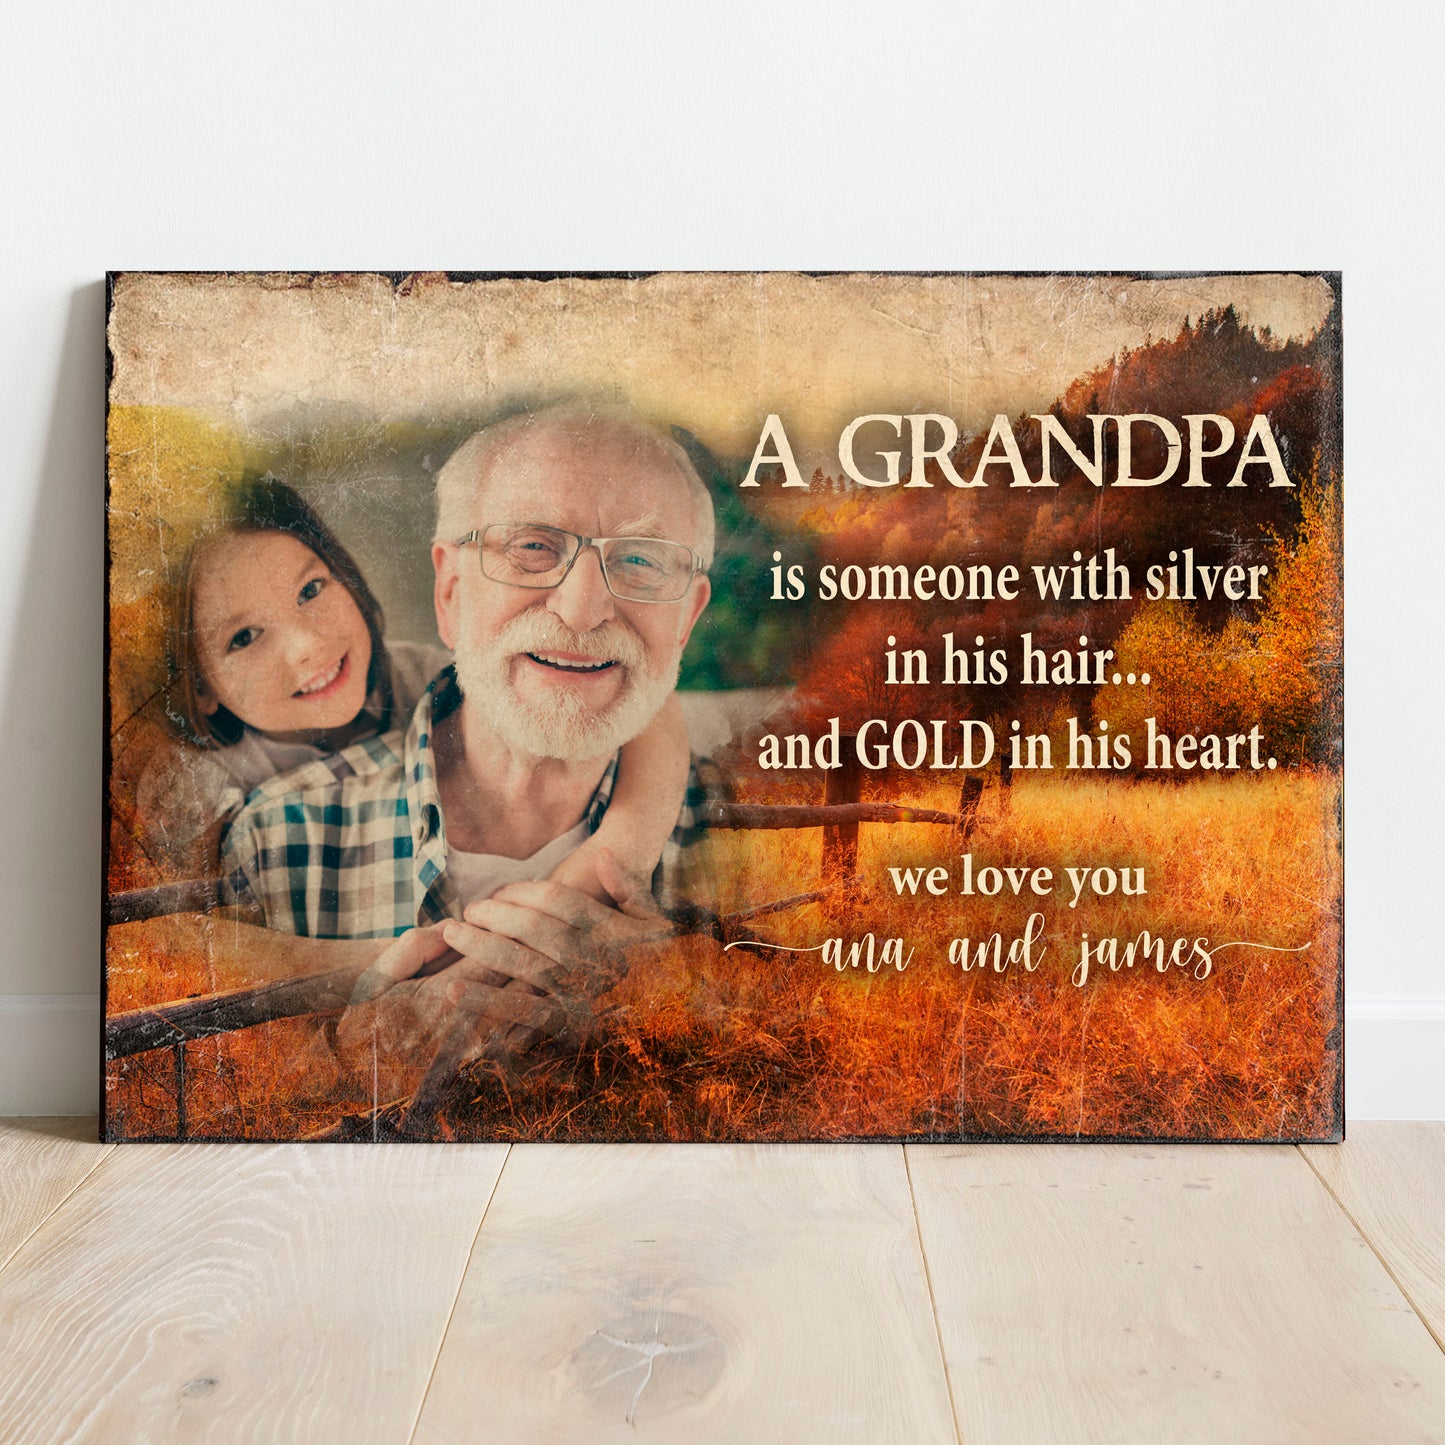 We Love You Grandpa Sign  - Image by Tailored Canvases